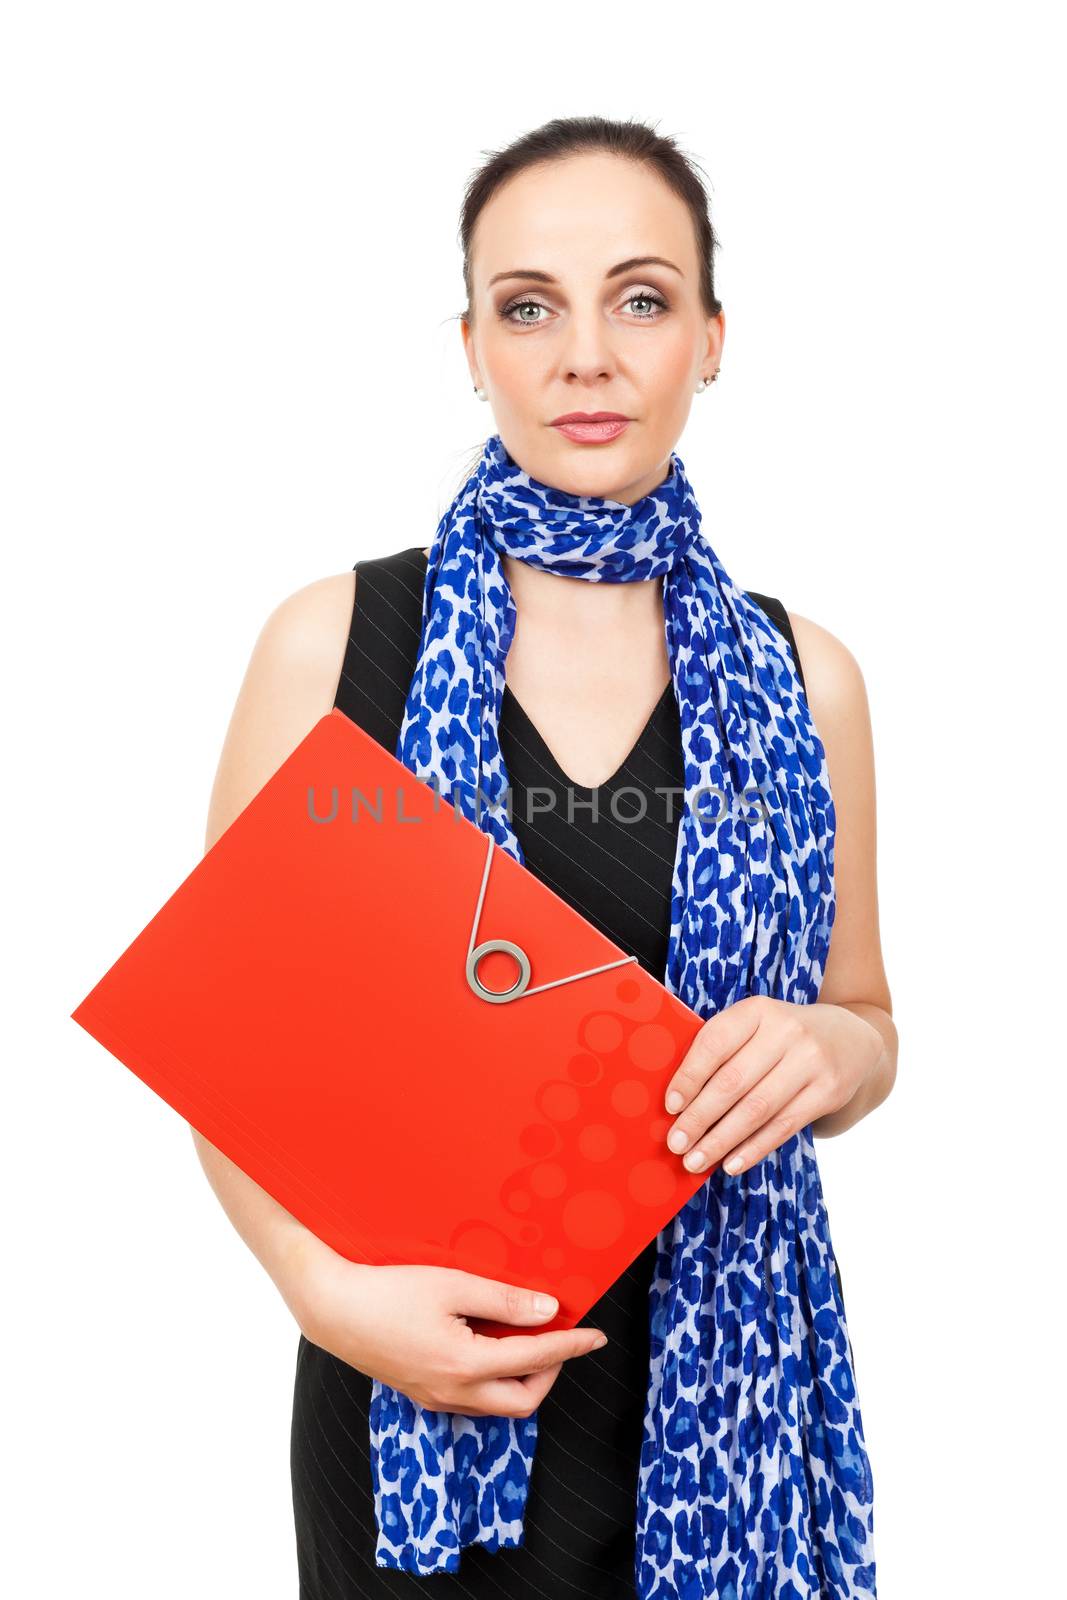 An image of a business woman with a red binder